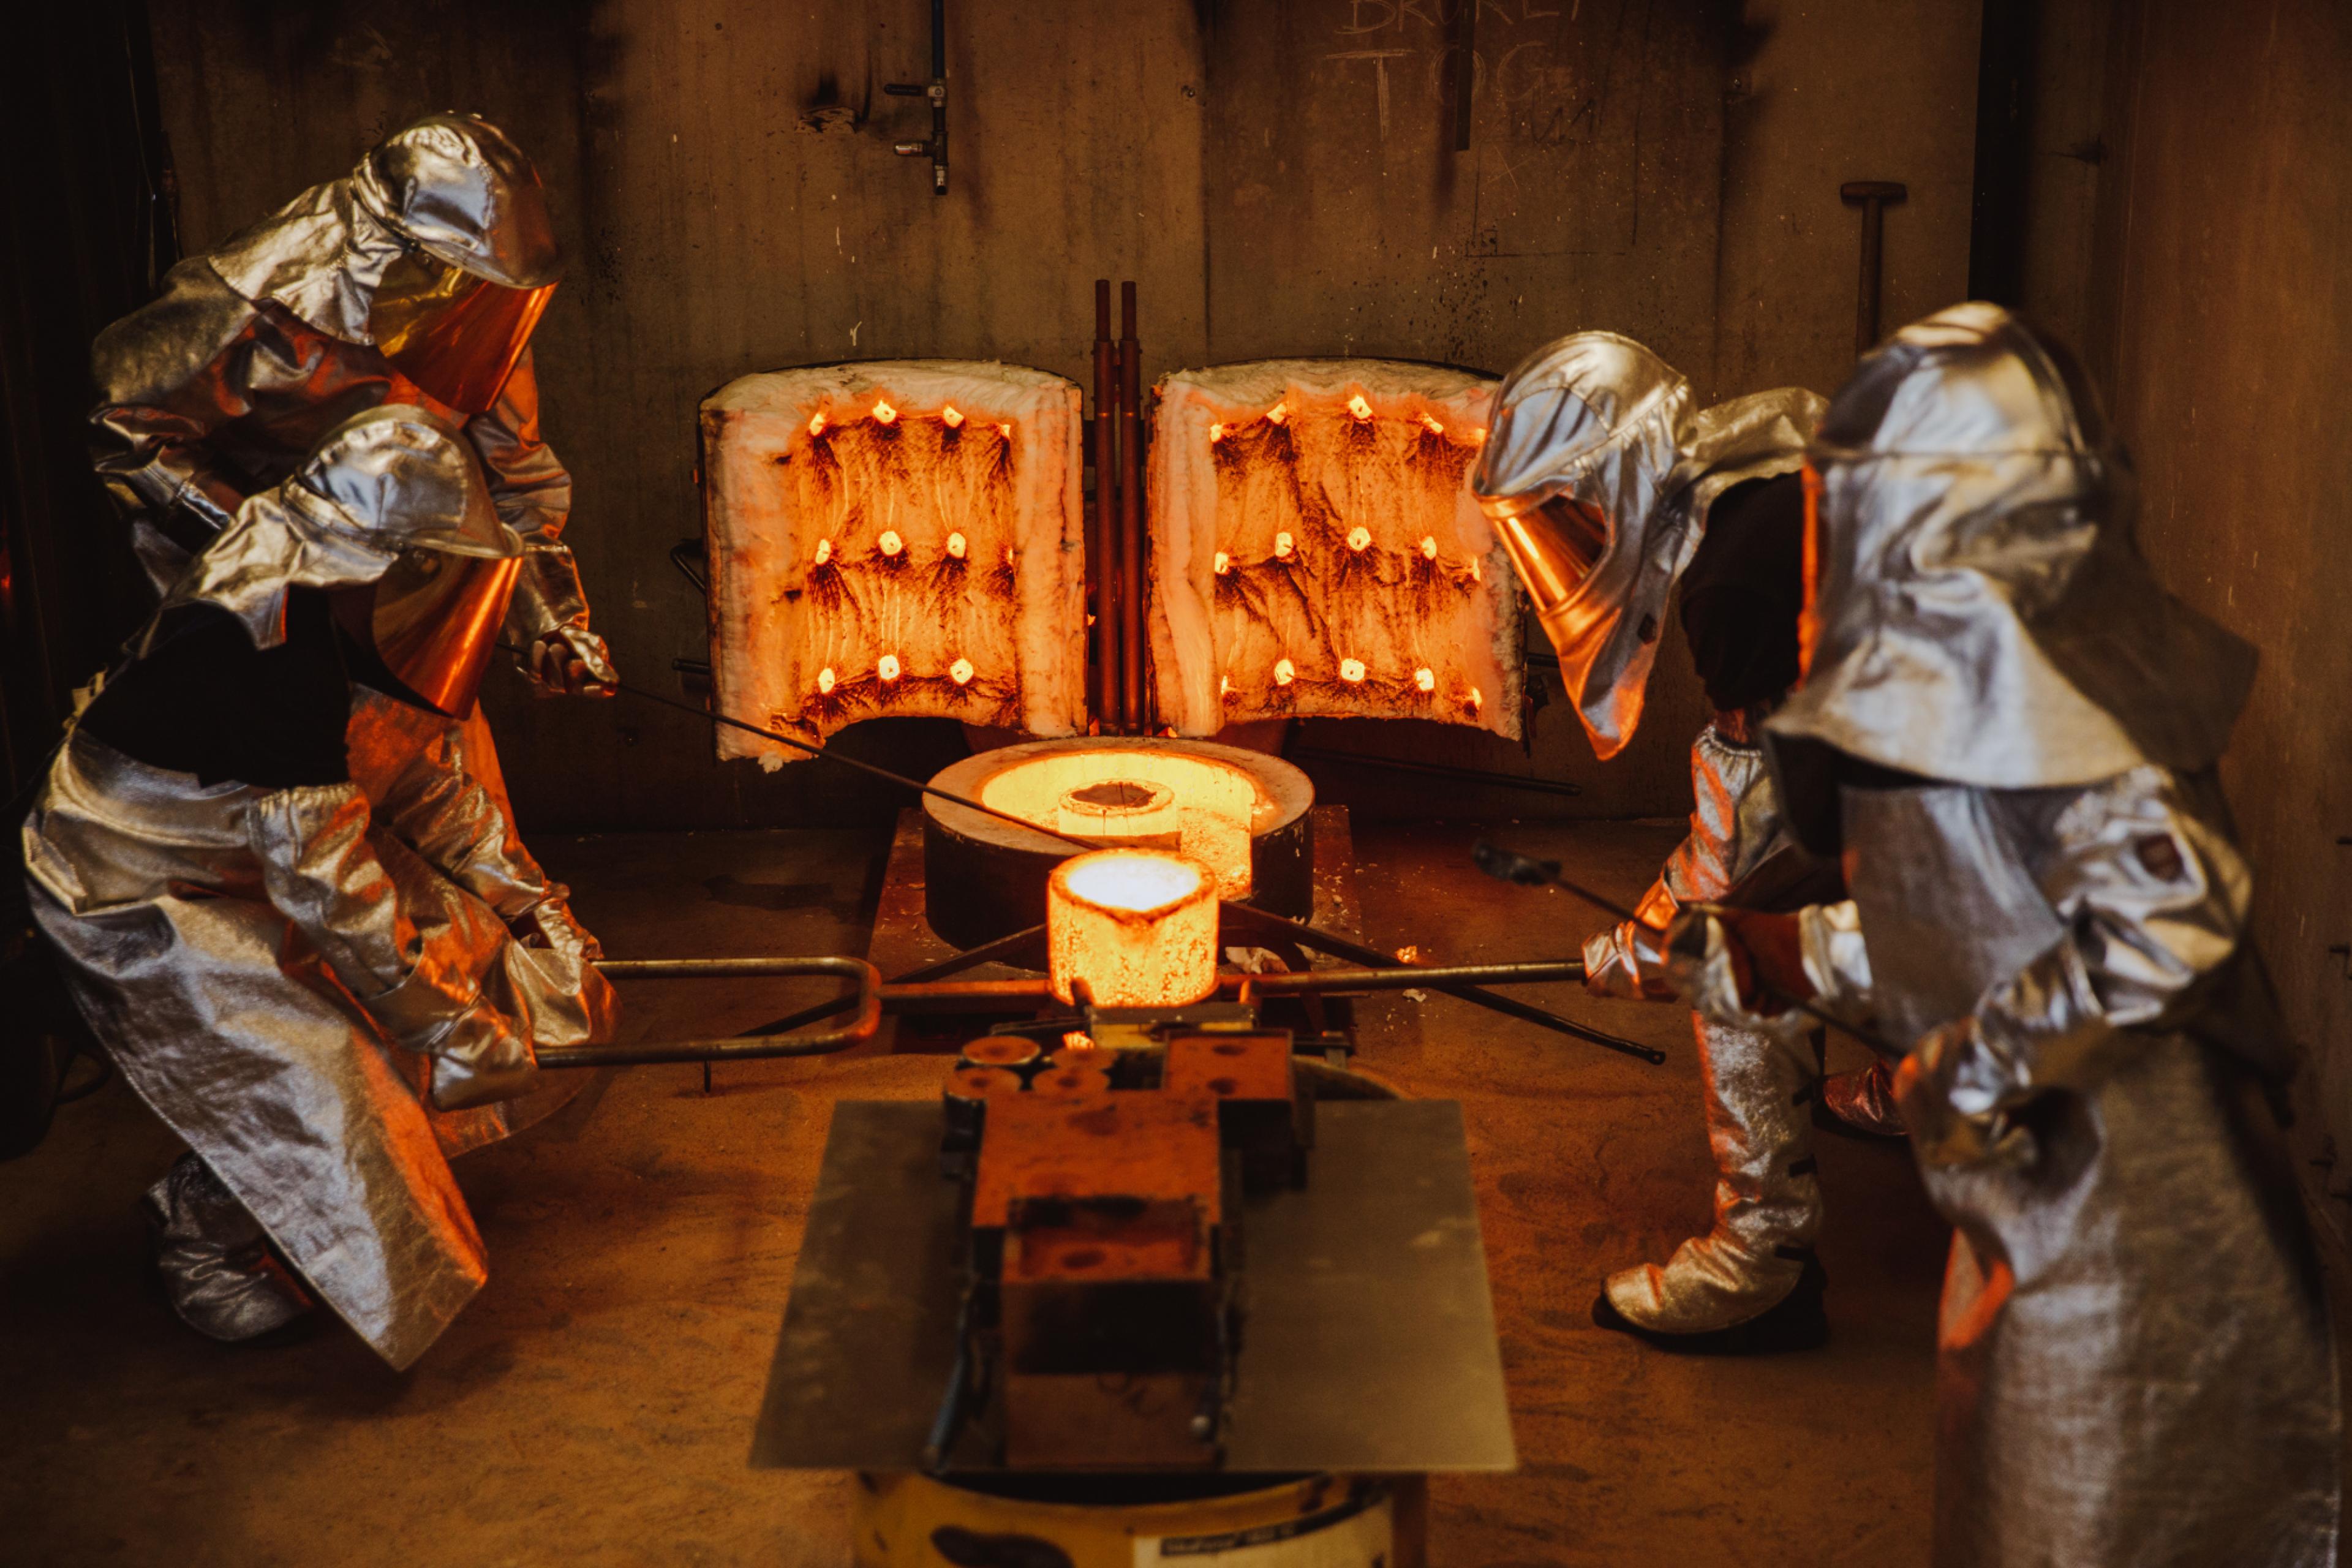 the process of casting hot iron